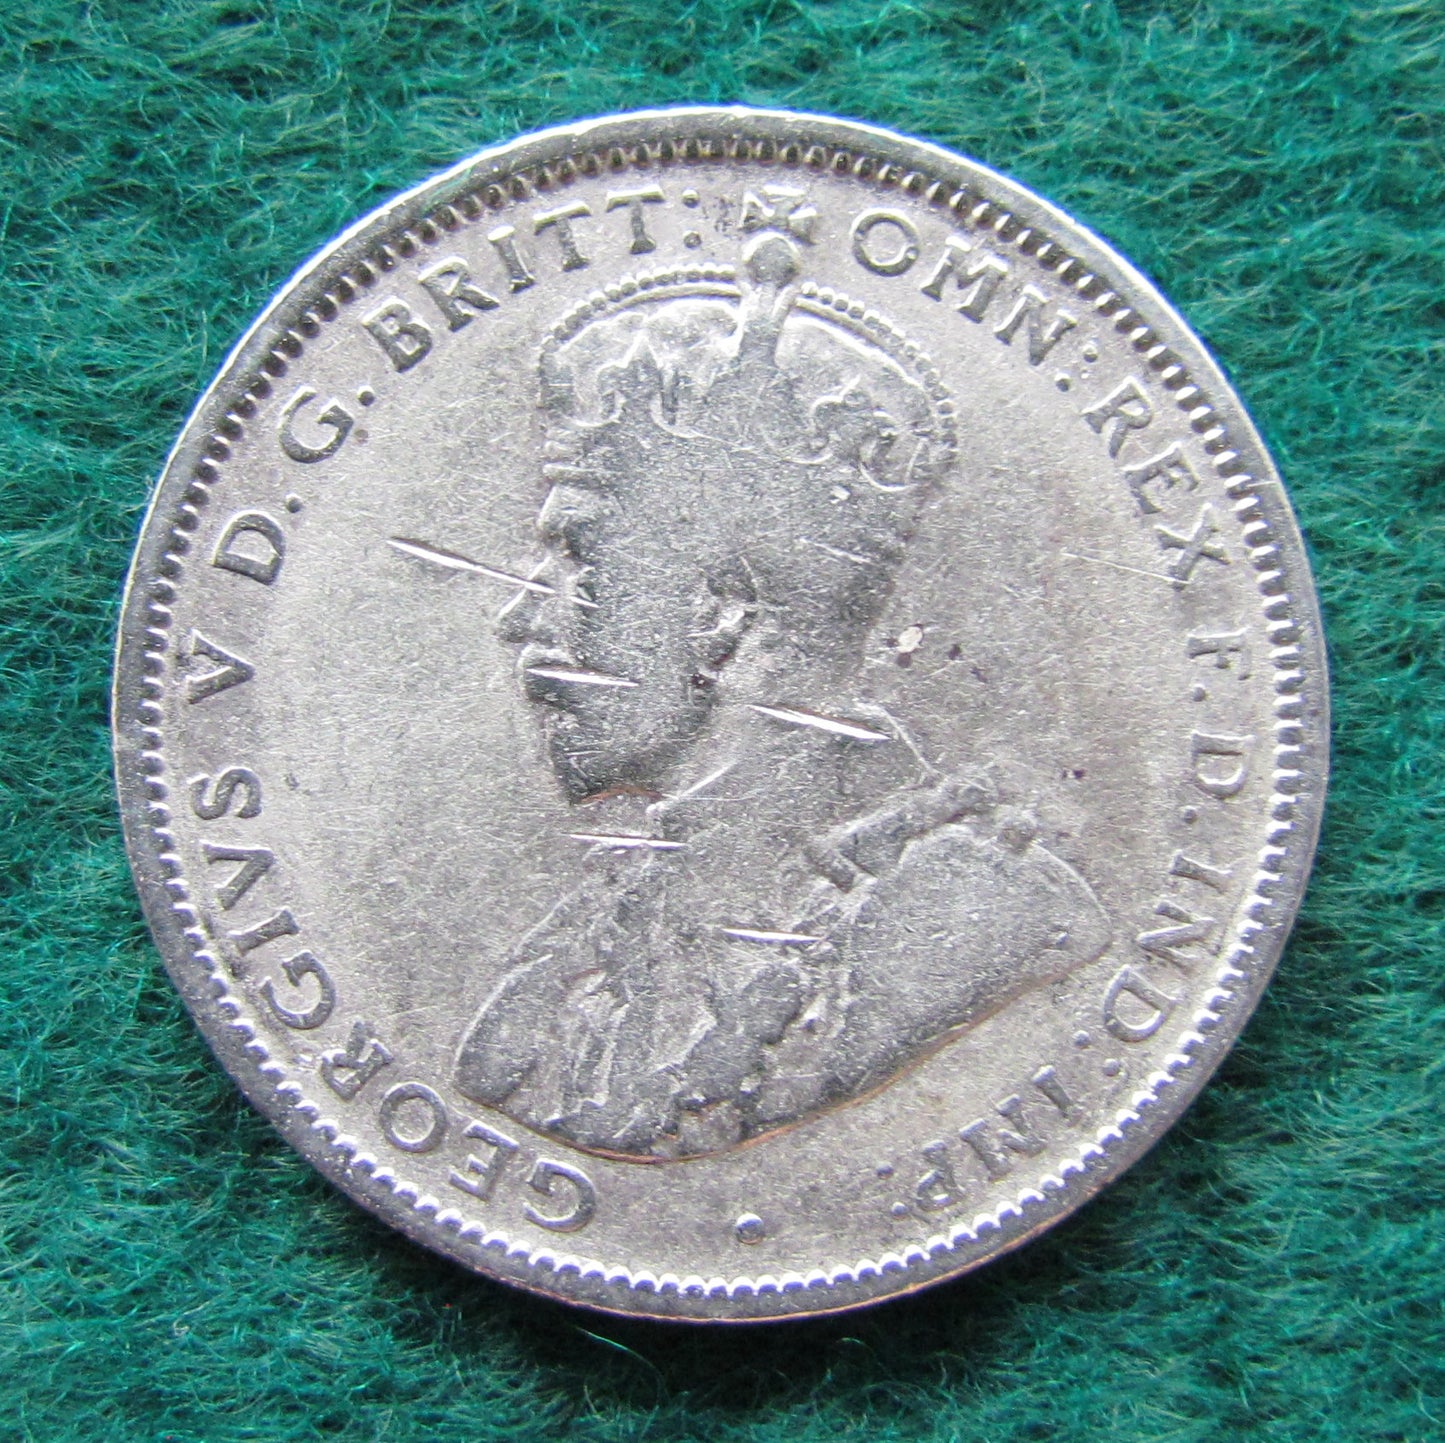 Australian 1914 1/- 1 Shilling Coin King George V Circulated